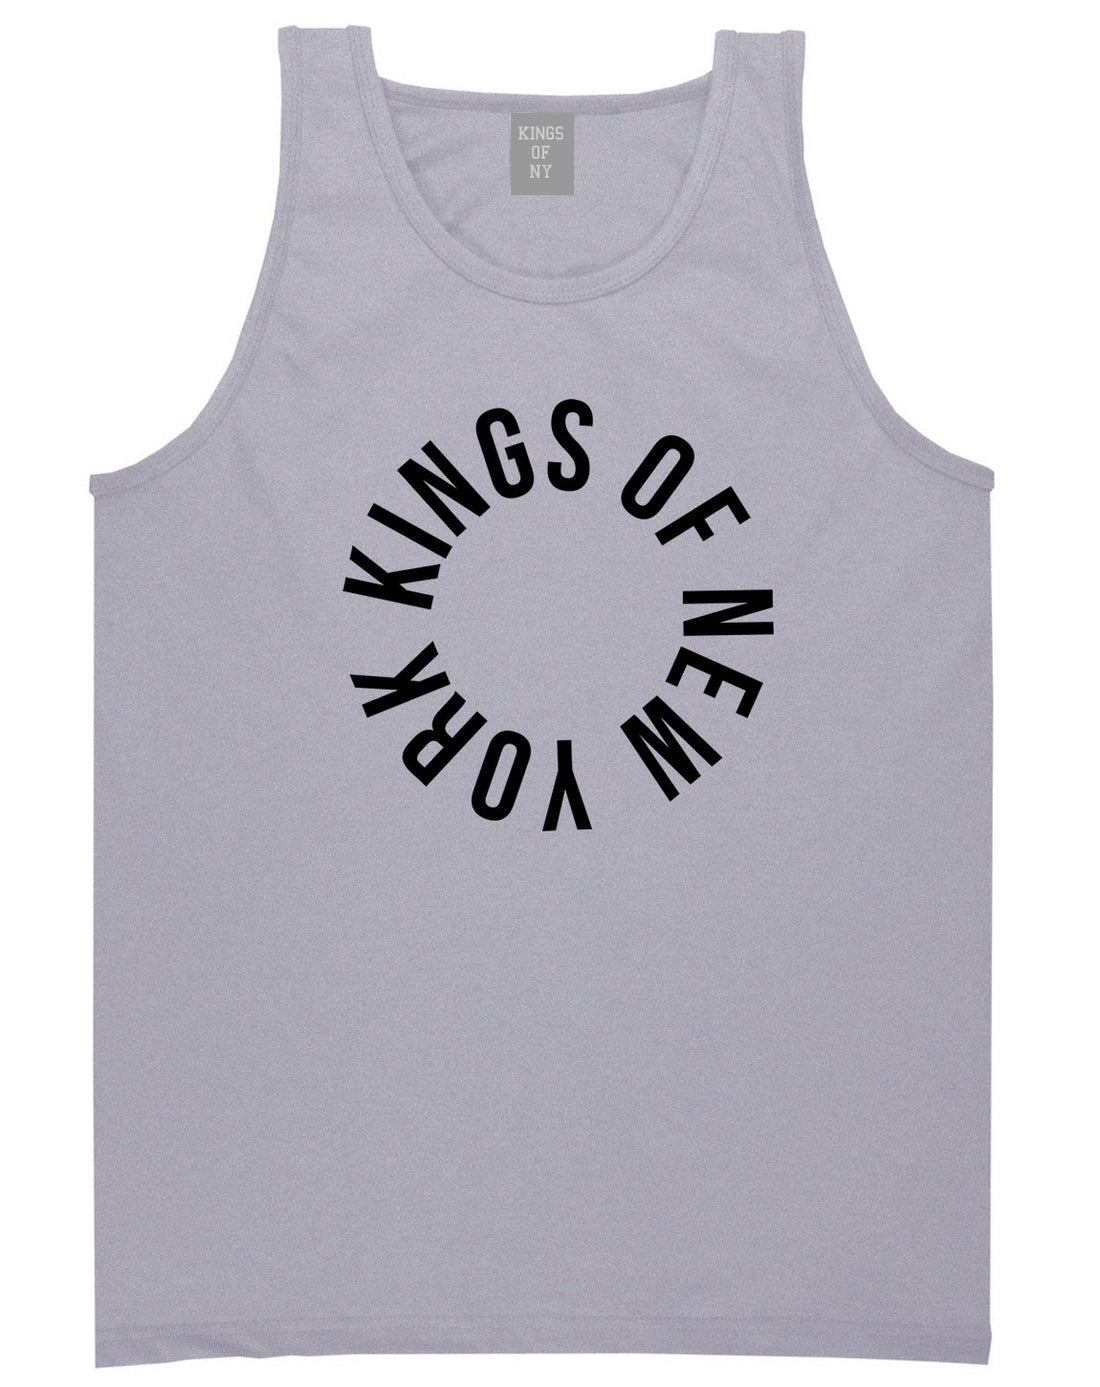 Kings Of NY Circle Logo New York Round About Tank Top in Grey